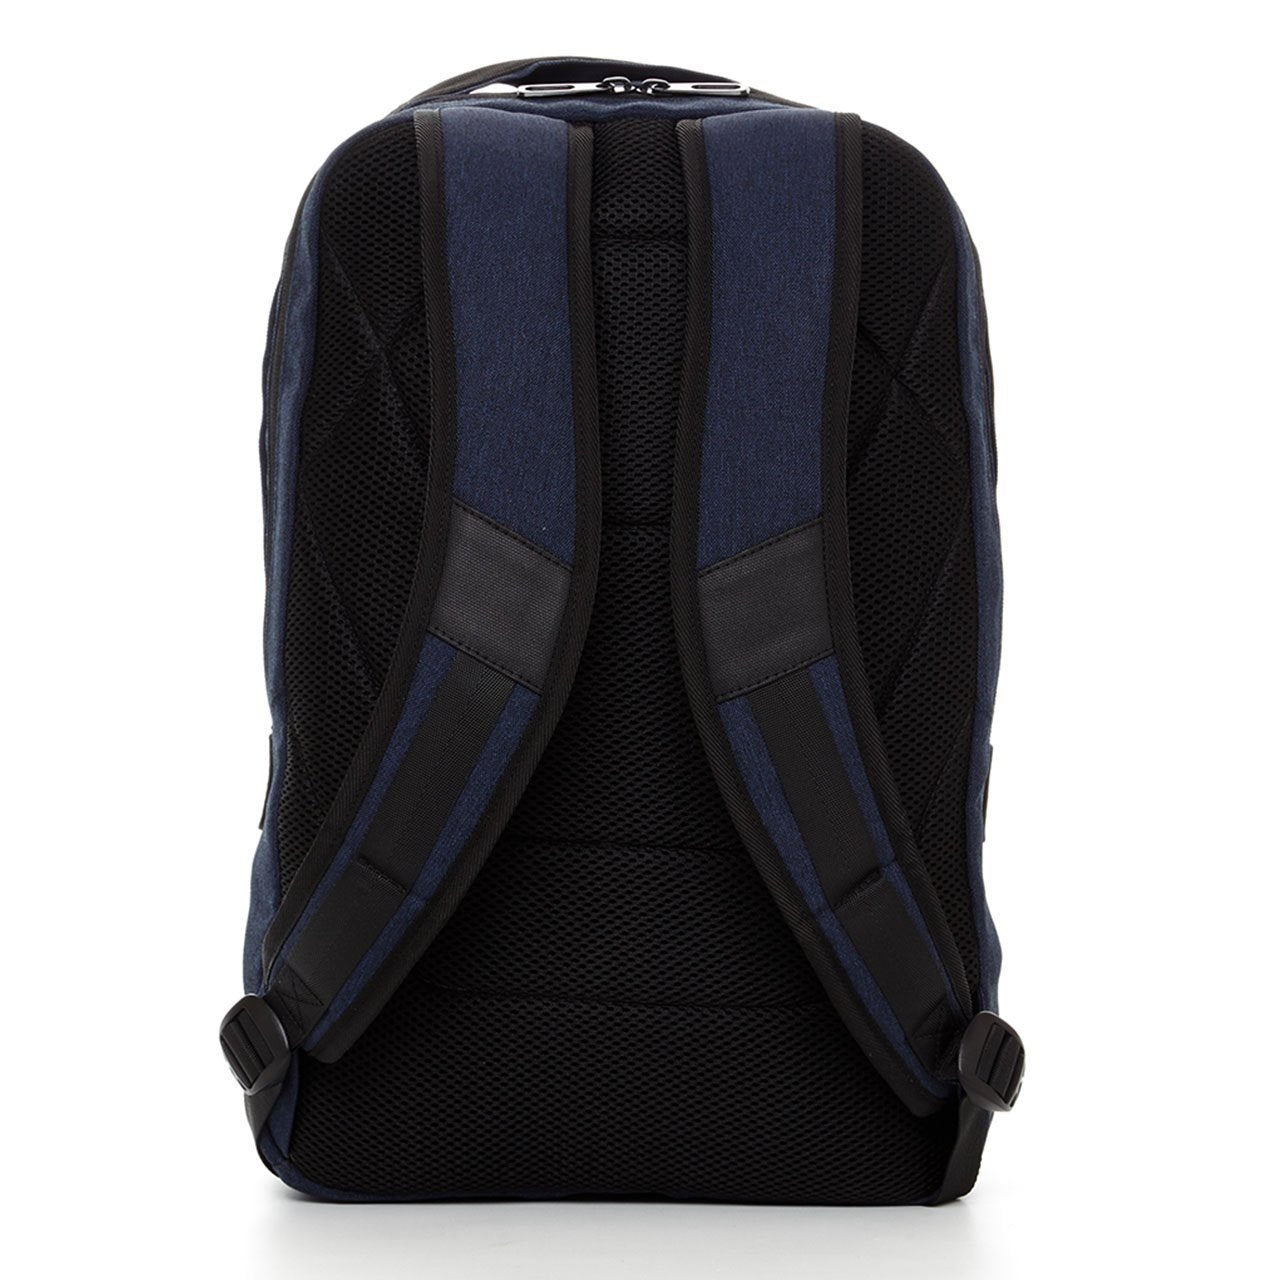 Hank All Purpose Backpack by PX Clothing - Women - Sporting Goods - Backpacks - Benn~Burry